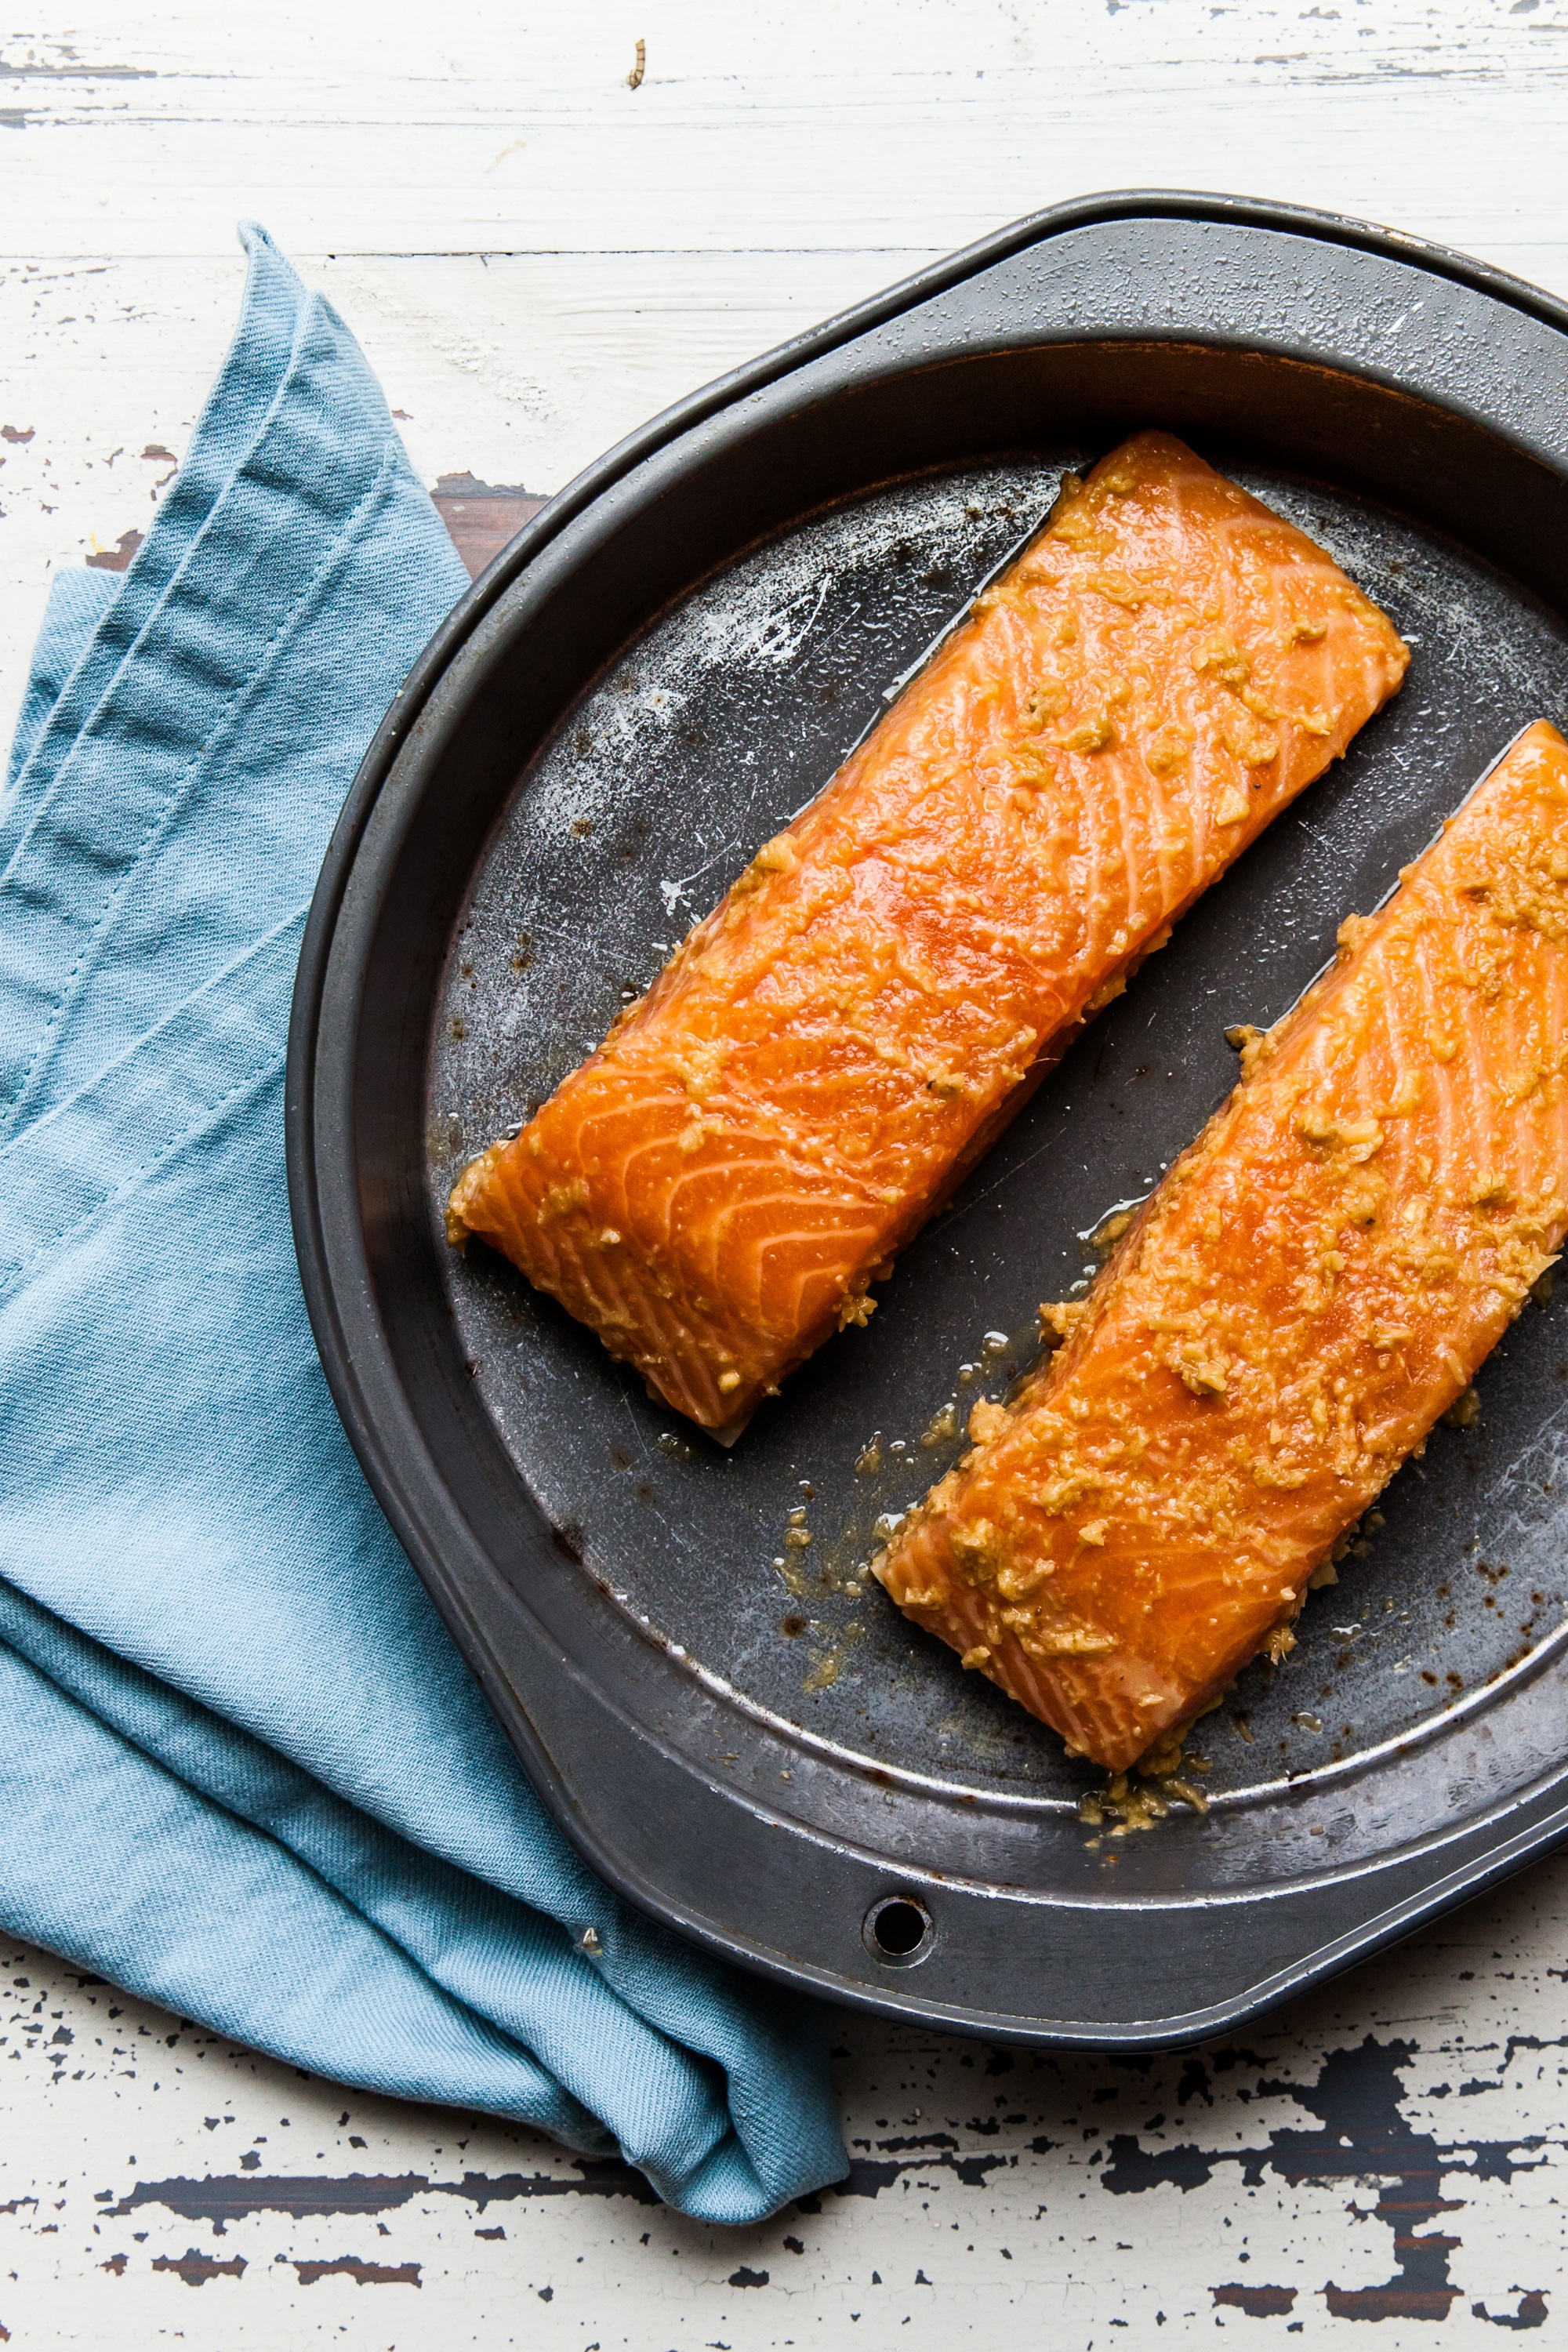 Baked salmon filets with Thai-inspired marinade on baking pan with blue napkin.